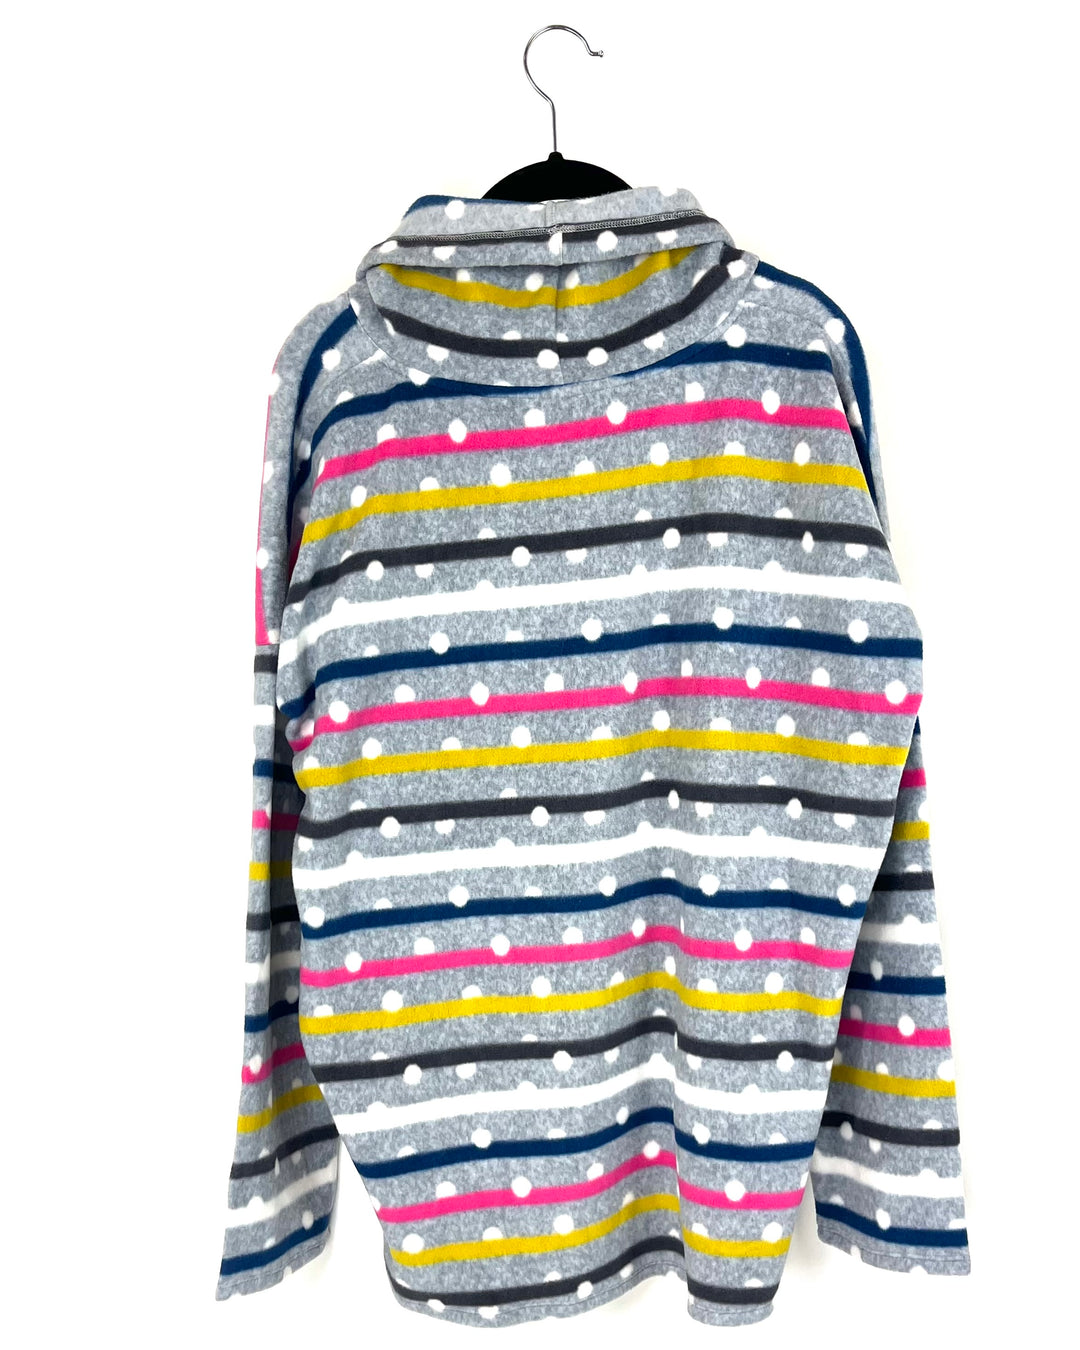 Multicolor Stripes and Polka Dot Hoodie - Size 4/6